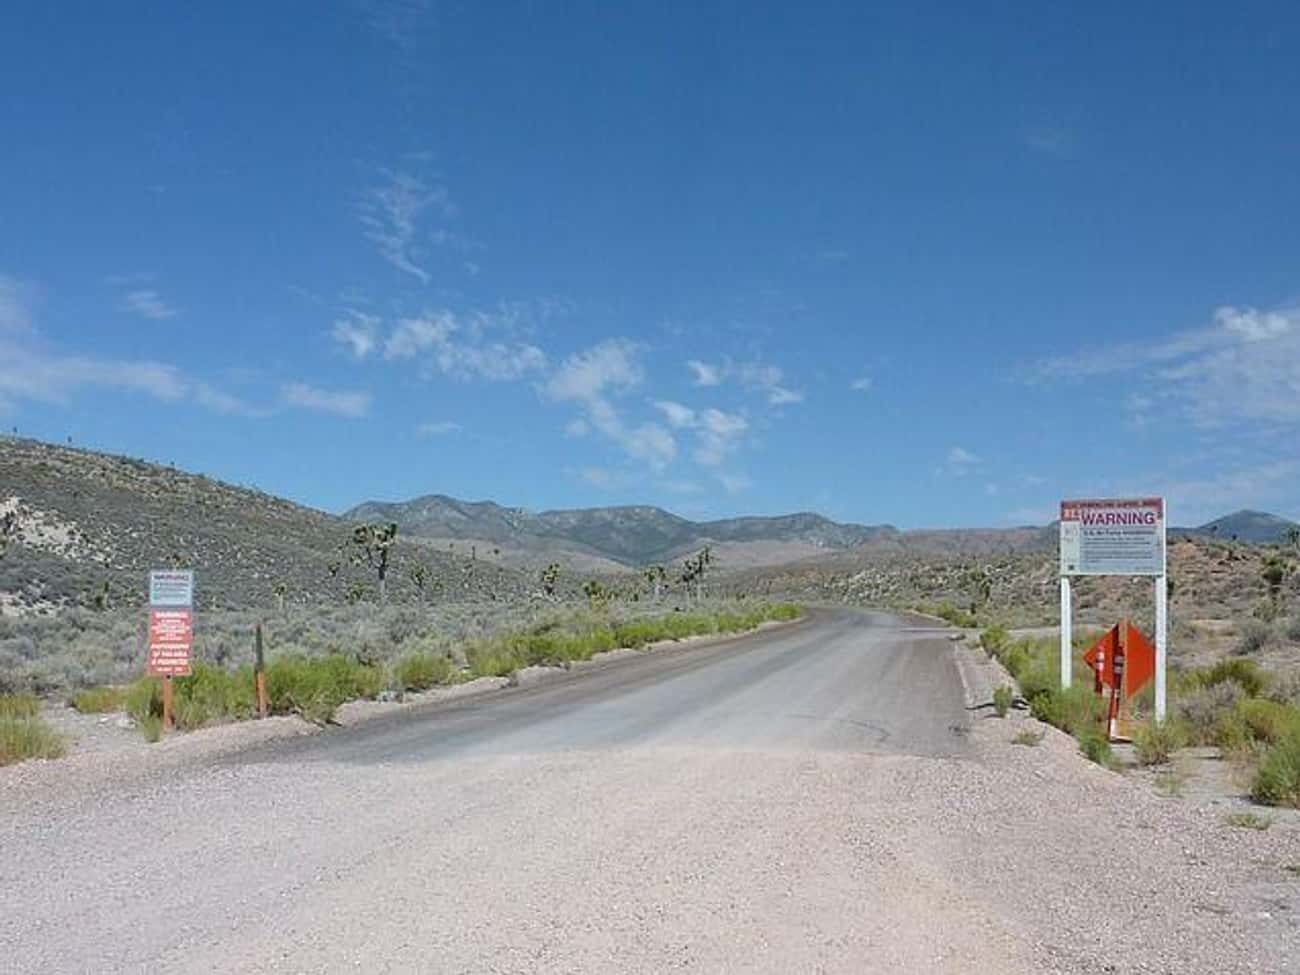 At Area 51, the US Government Tested Experimental Aircraft and Perhaps Much More